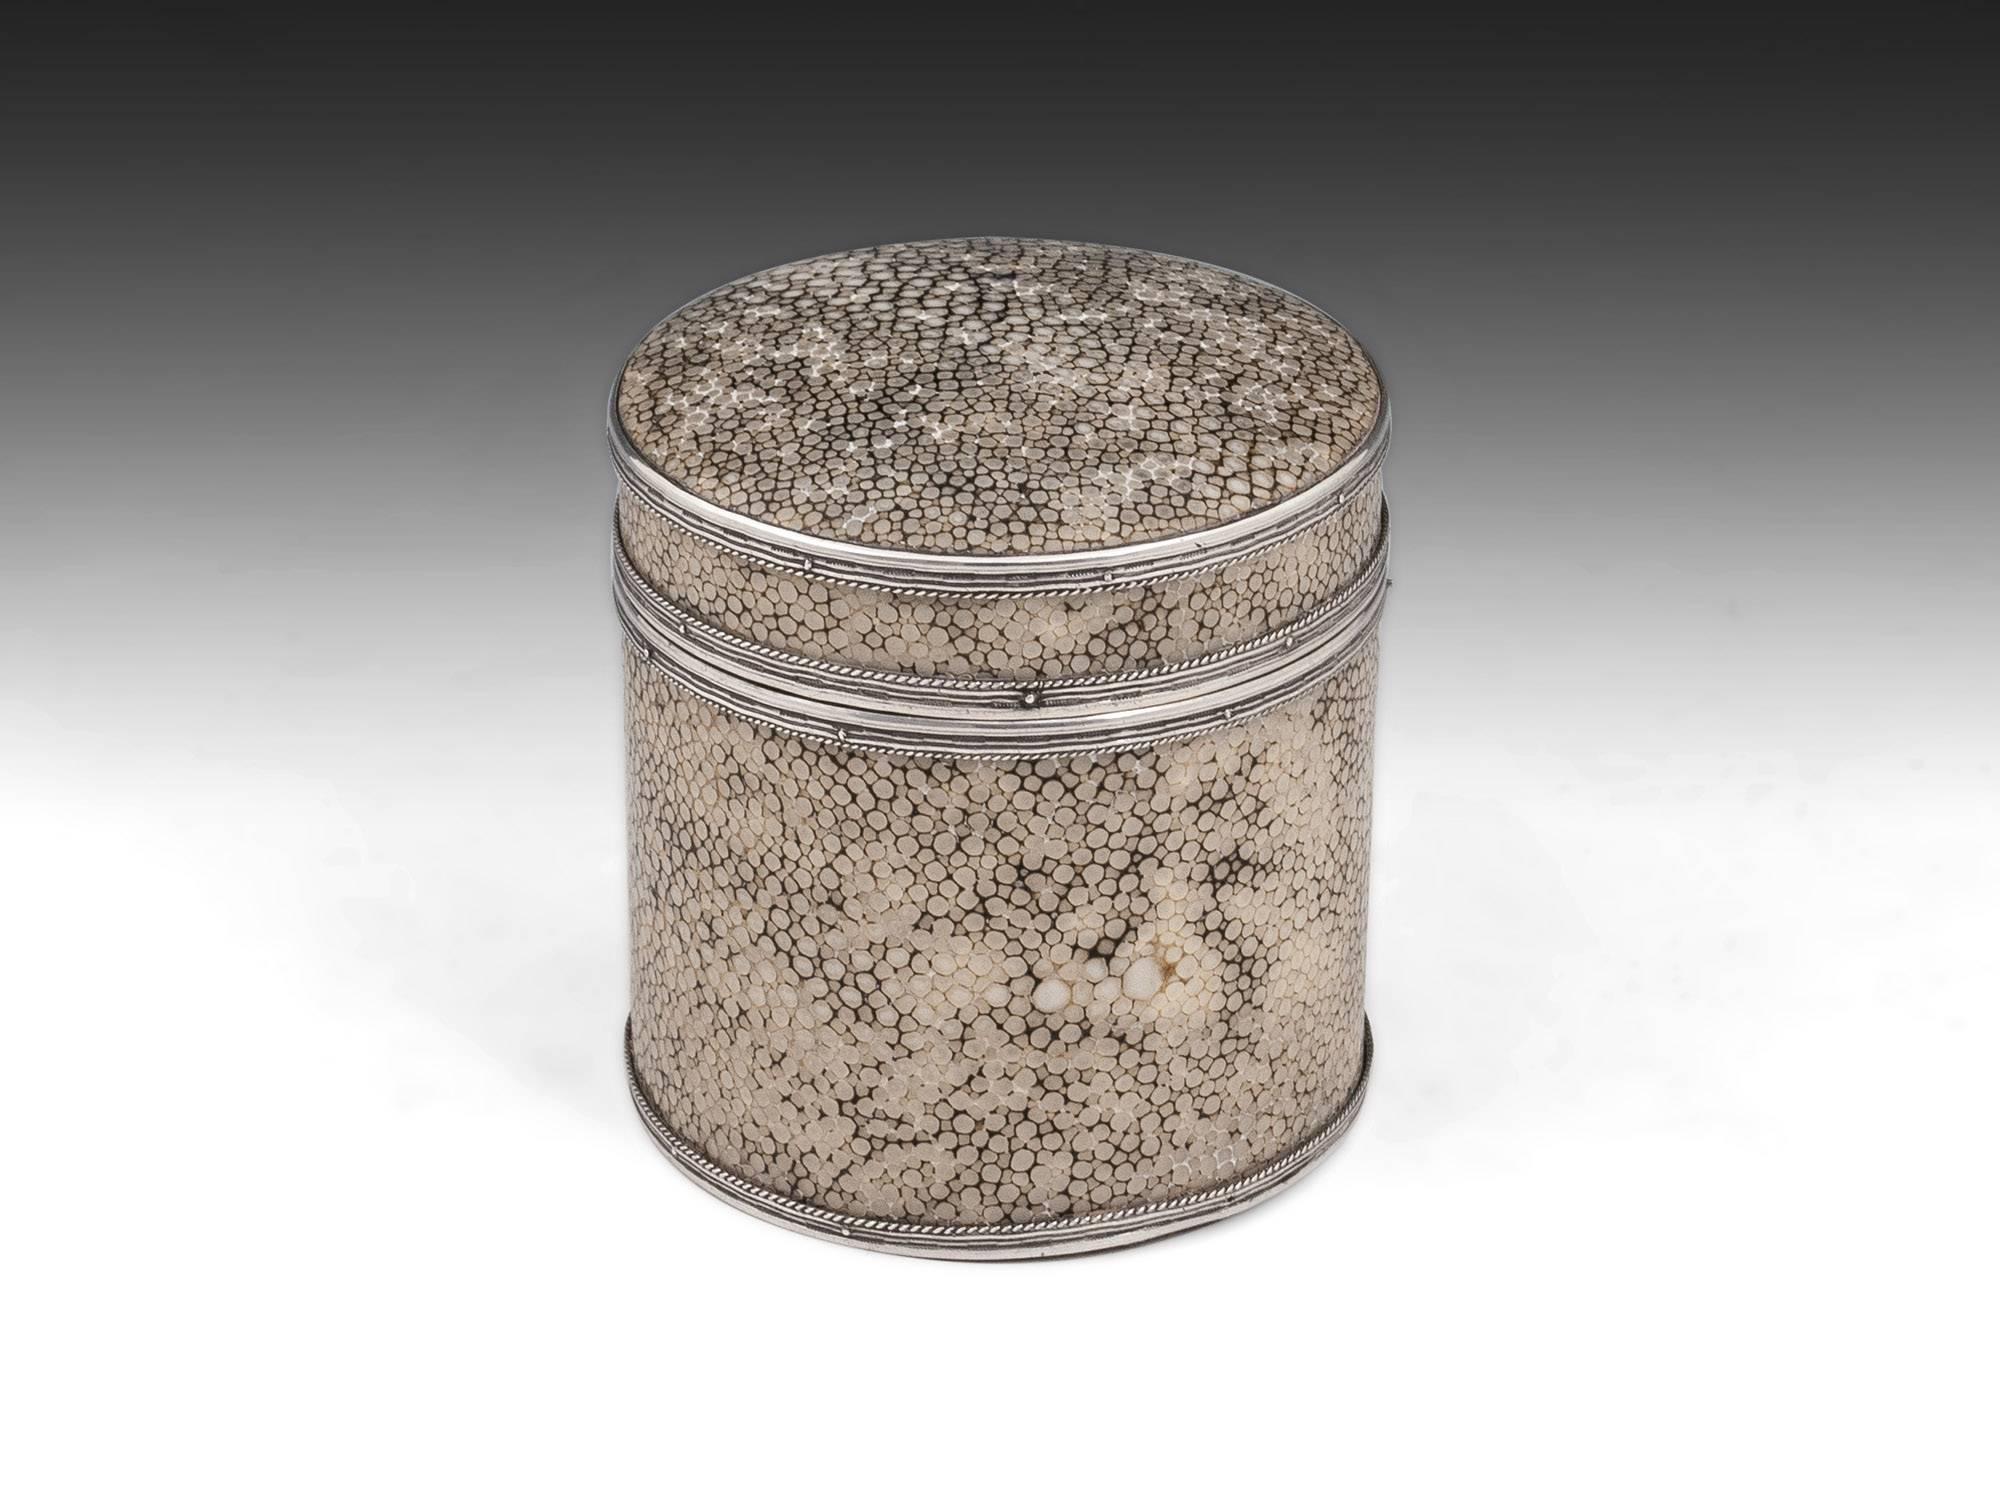 Cylindrical shagreen box and cover by John Paul Cooper, made from walnut, covered with shagreen and finished with applied engraved silver bands and rope twisted mounts. The underside of the removable lid features a small silver plaque which reads “J